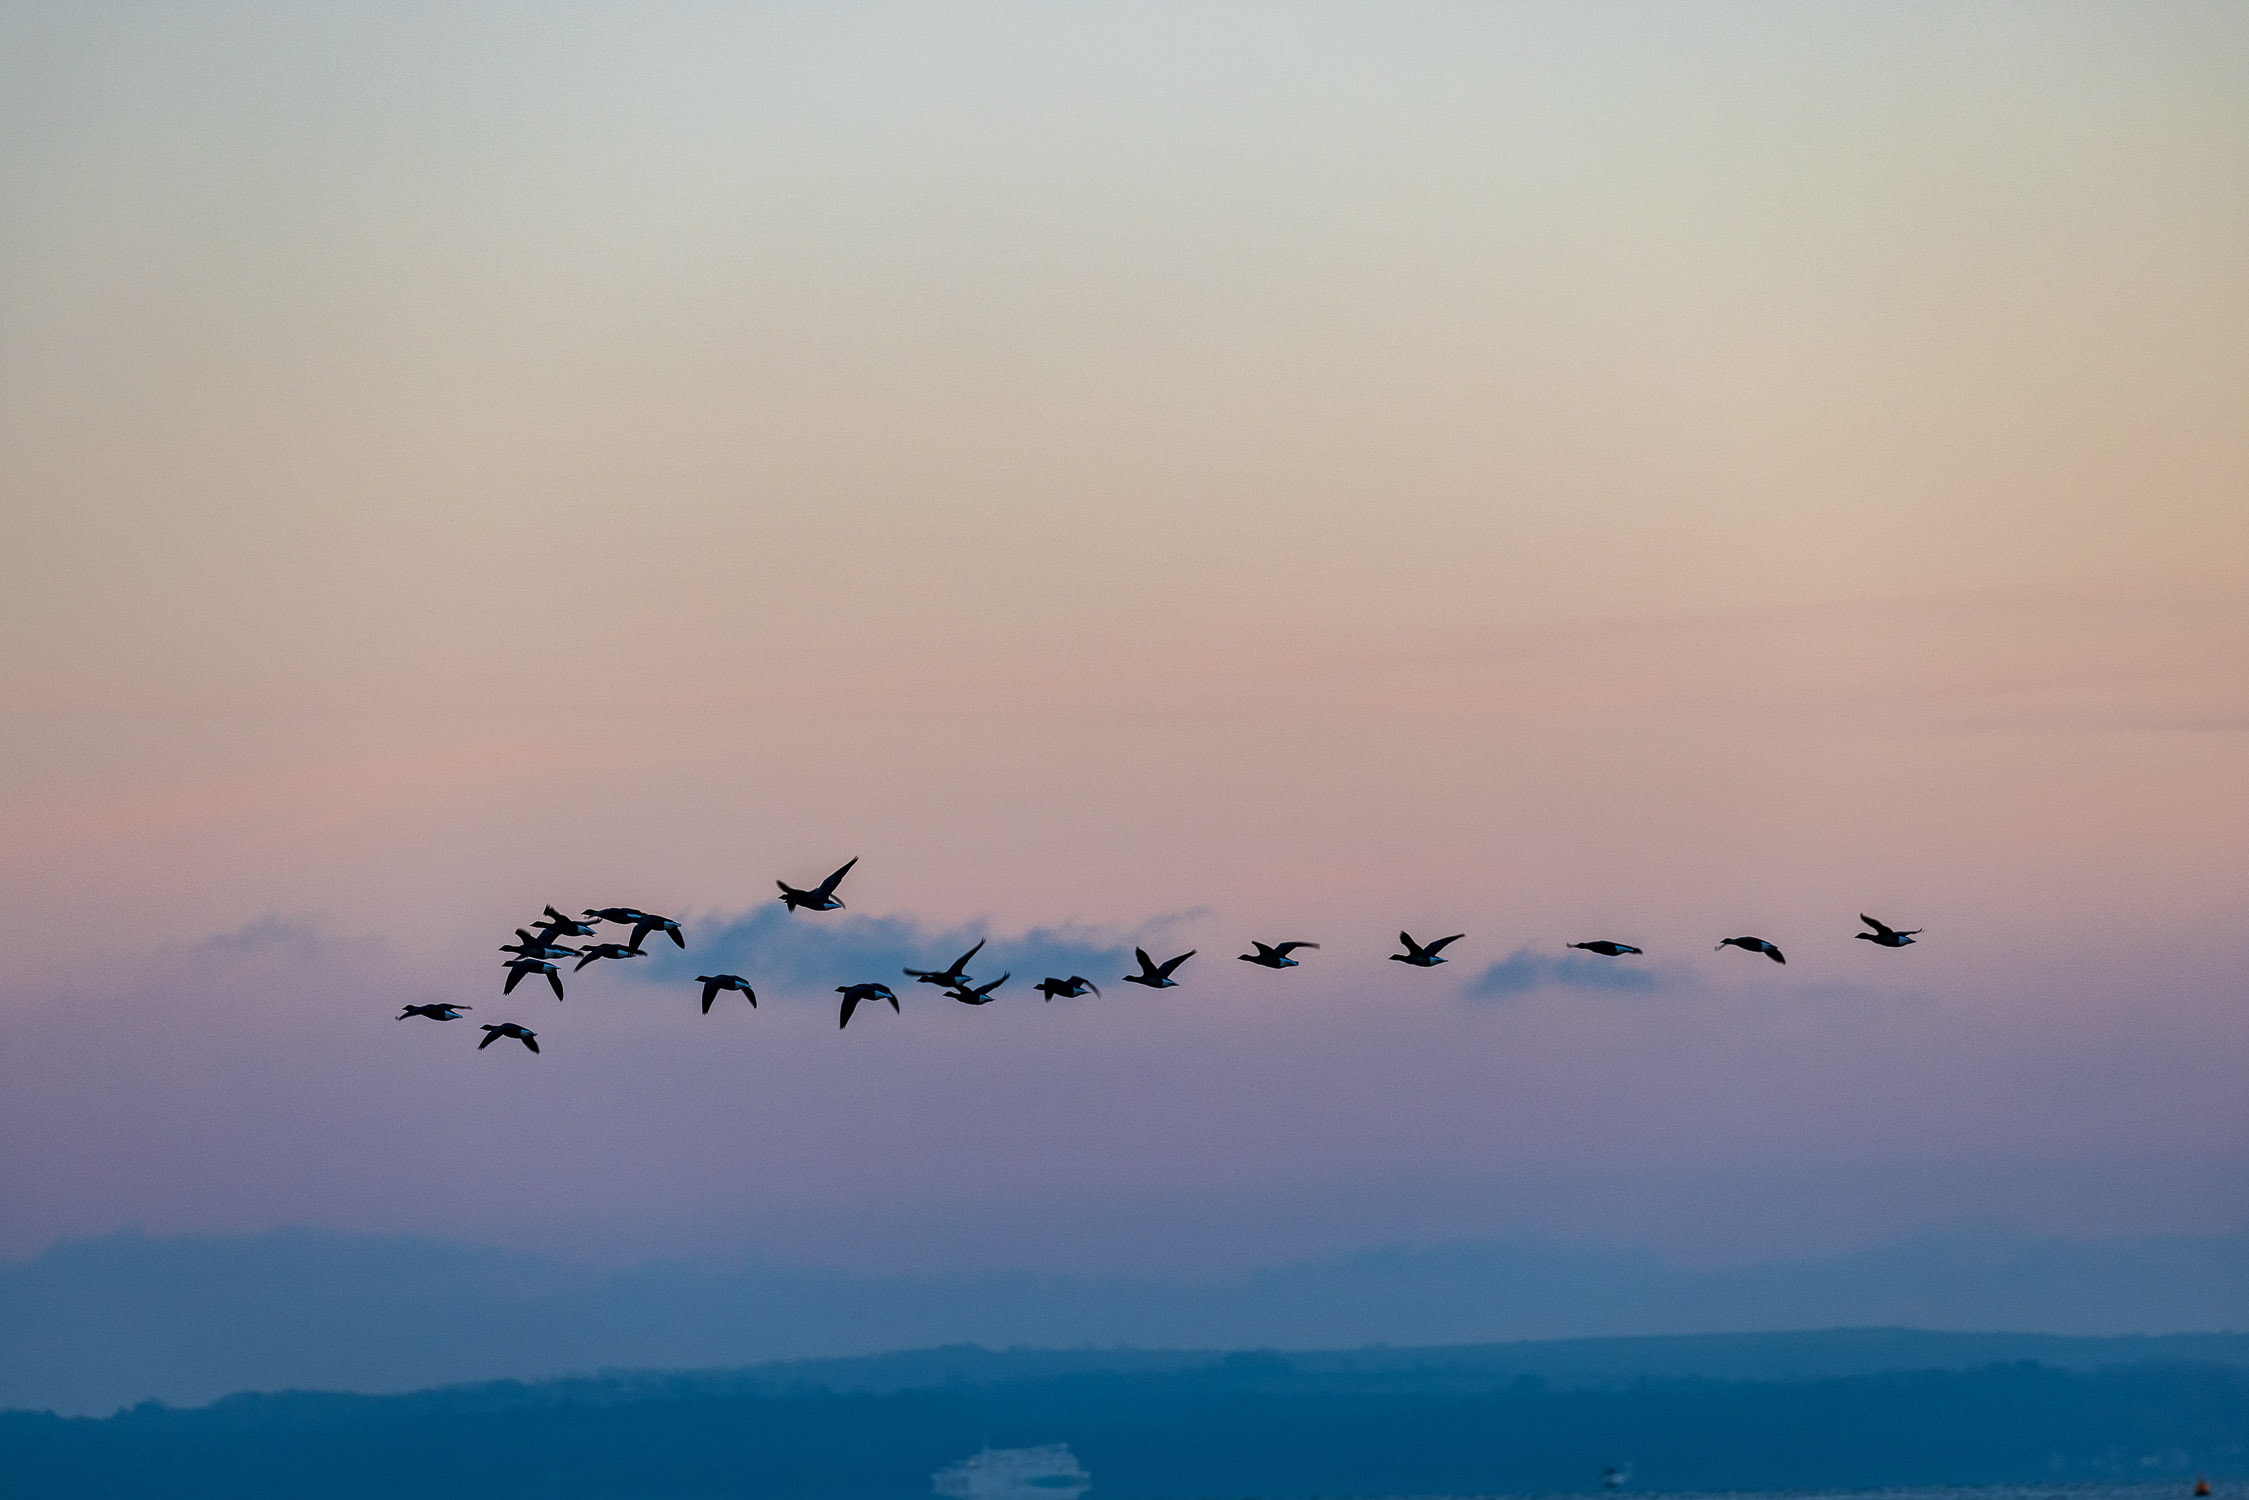 Geese above the Solent